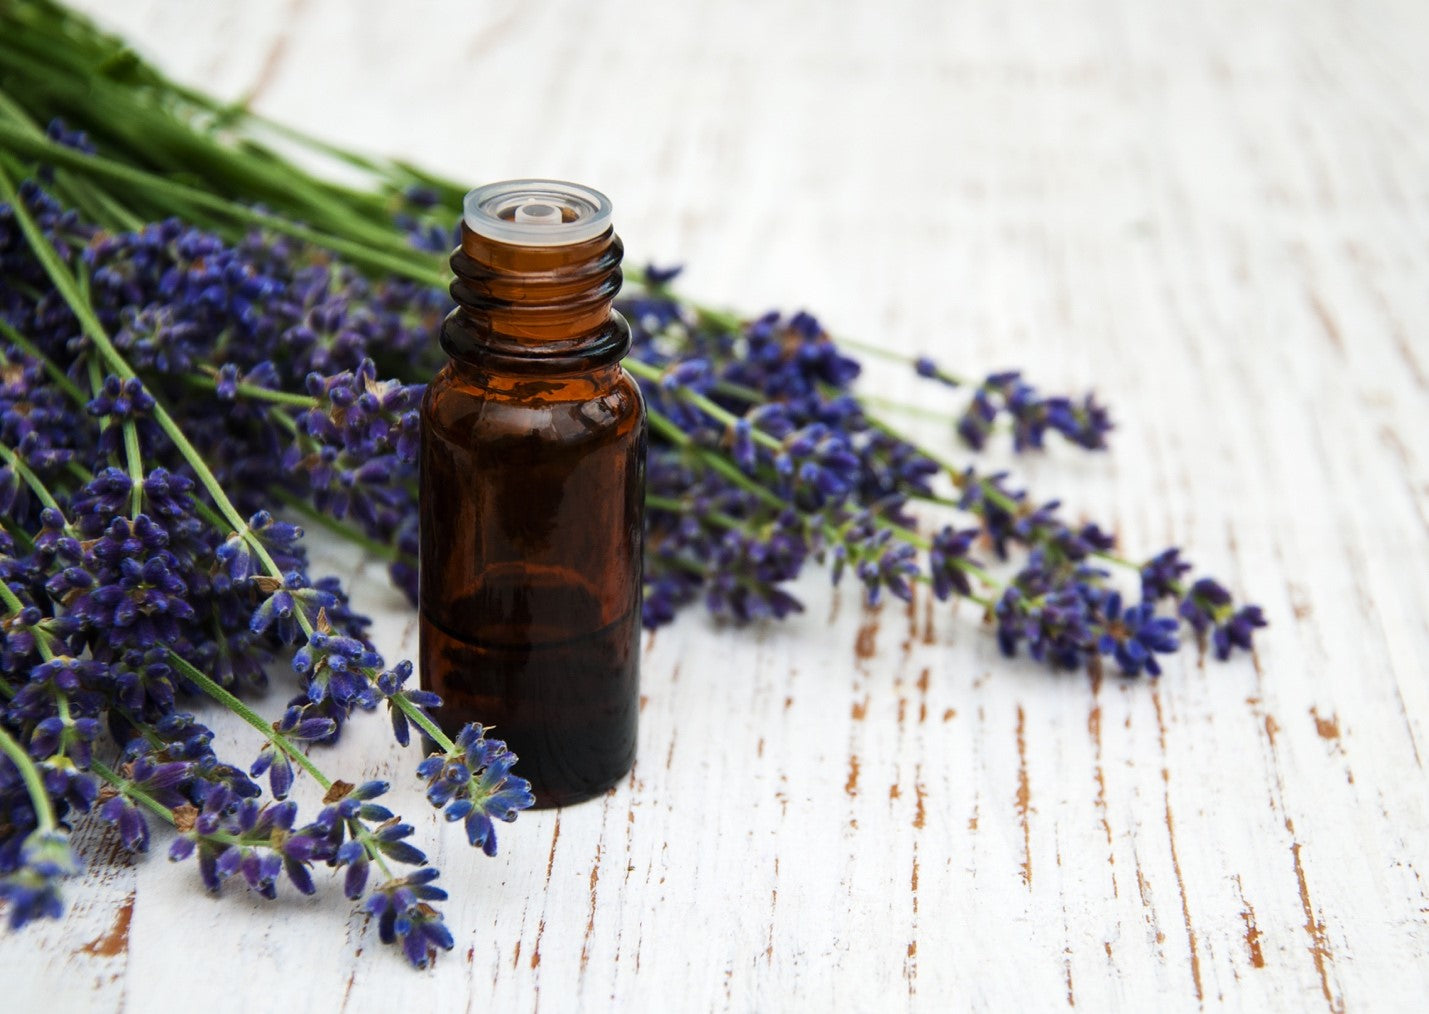 How much does lavender essential oil cost?